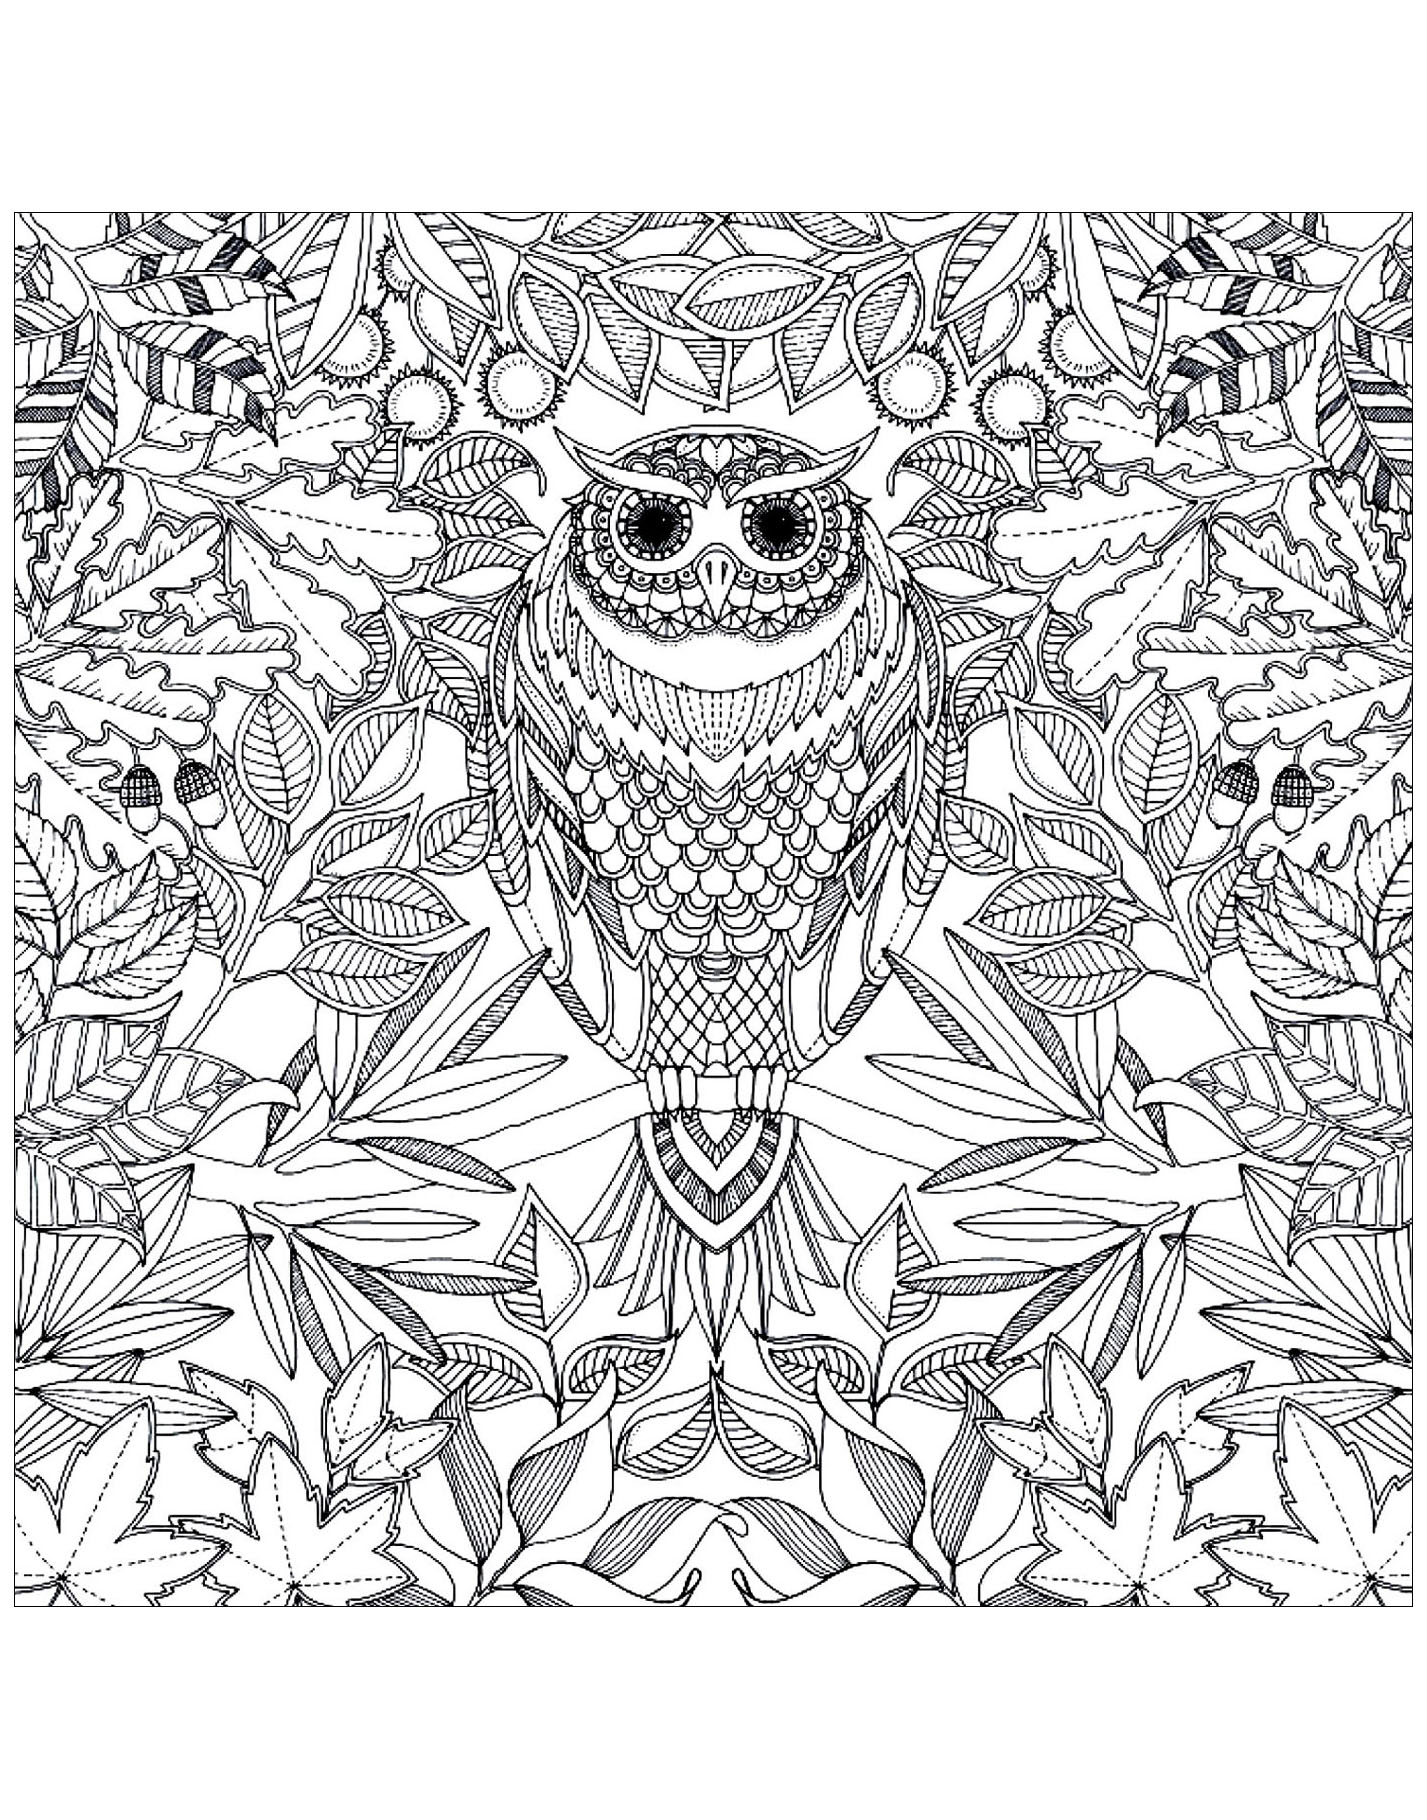 Download Hibou - Owls Adult Coloring Pages